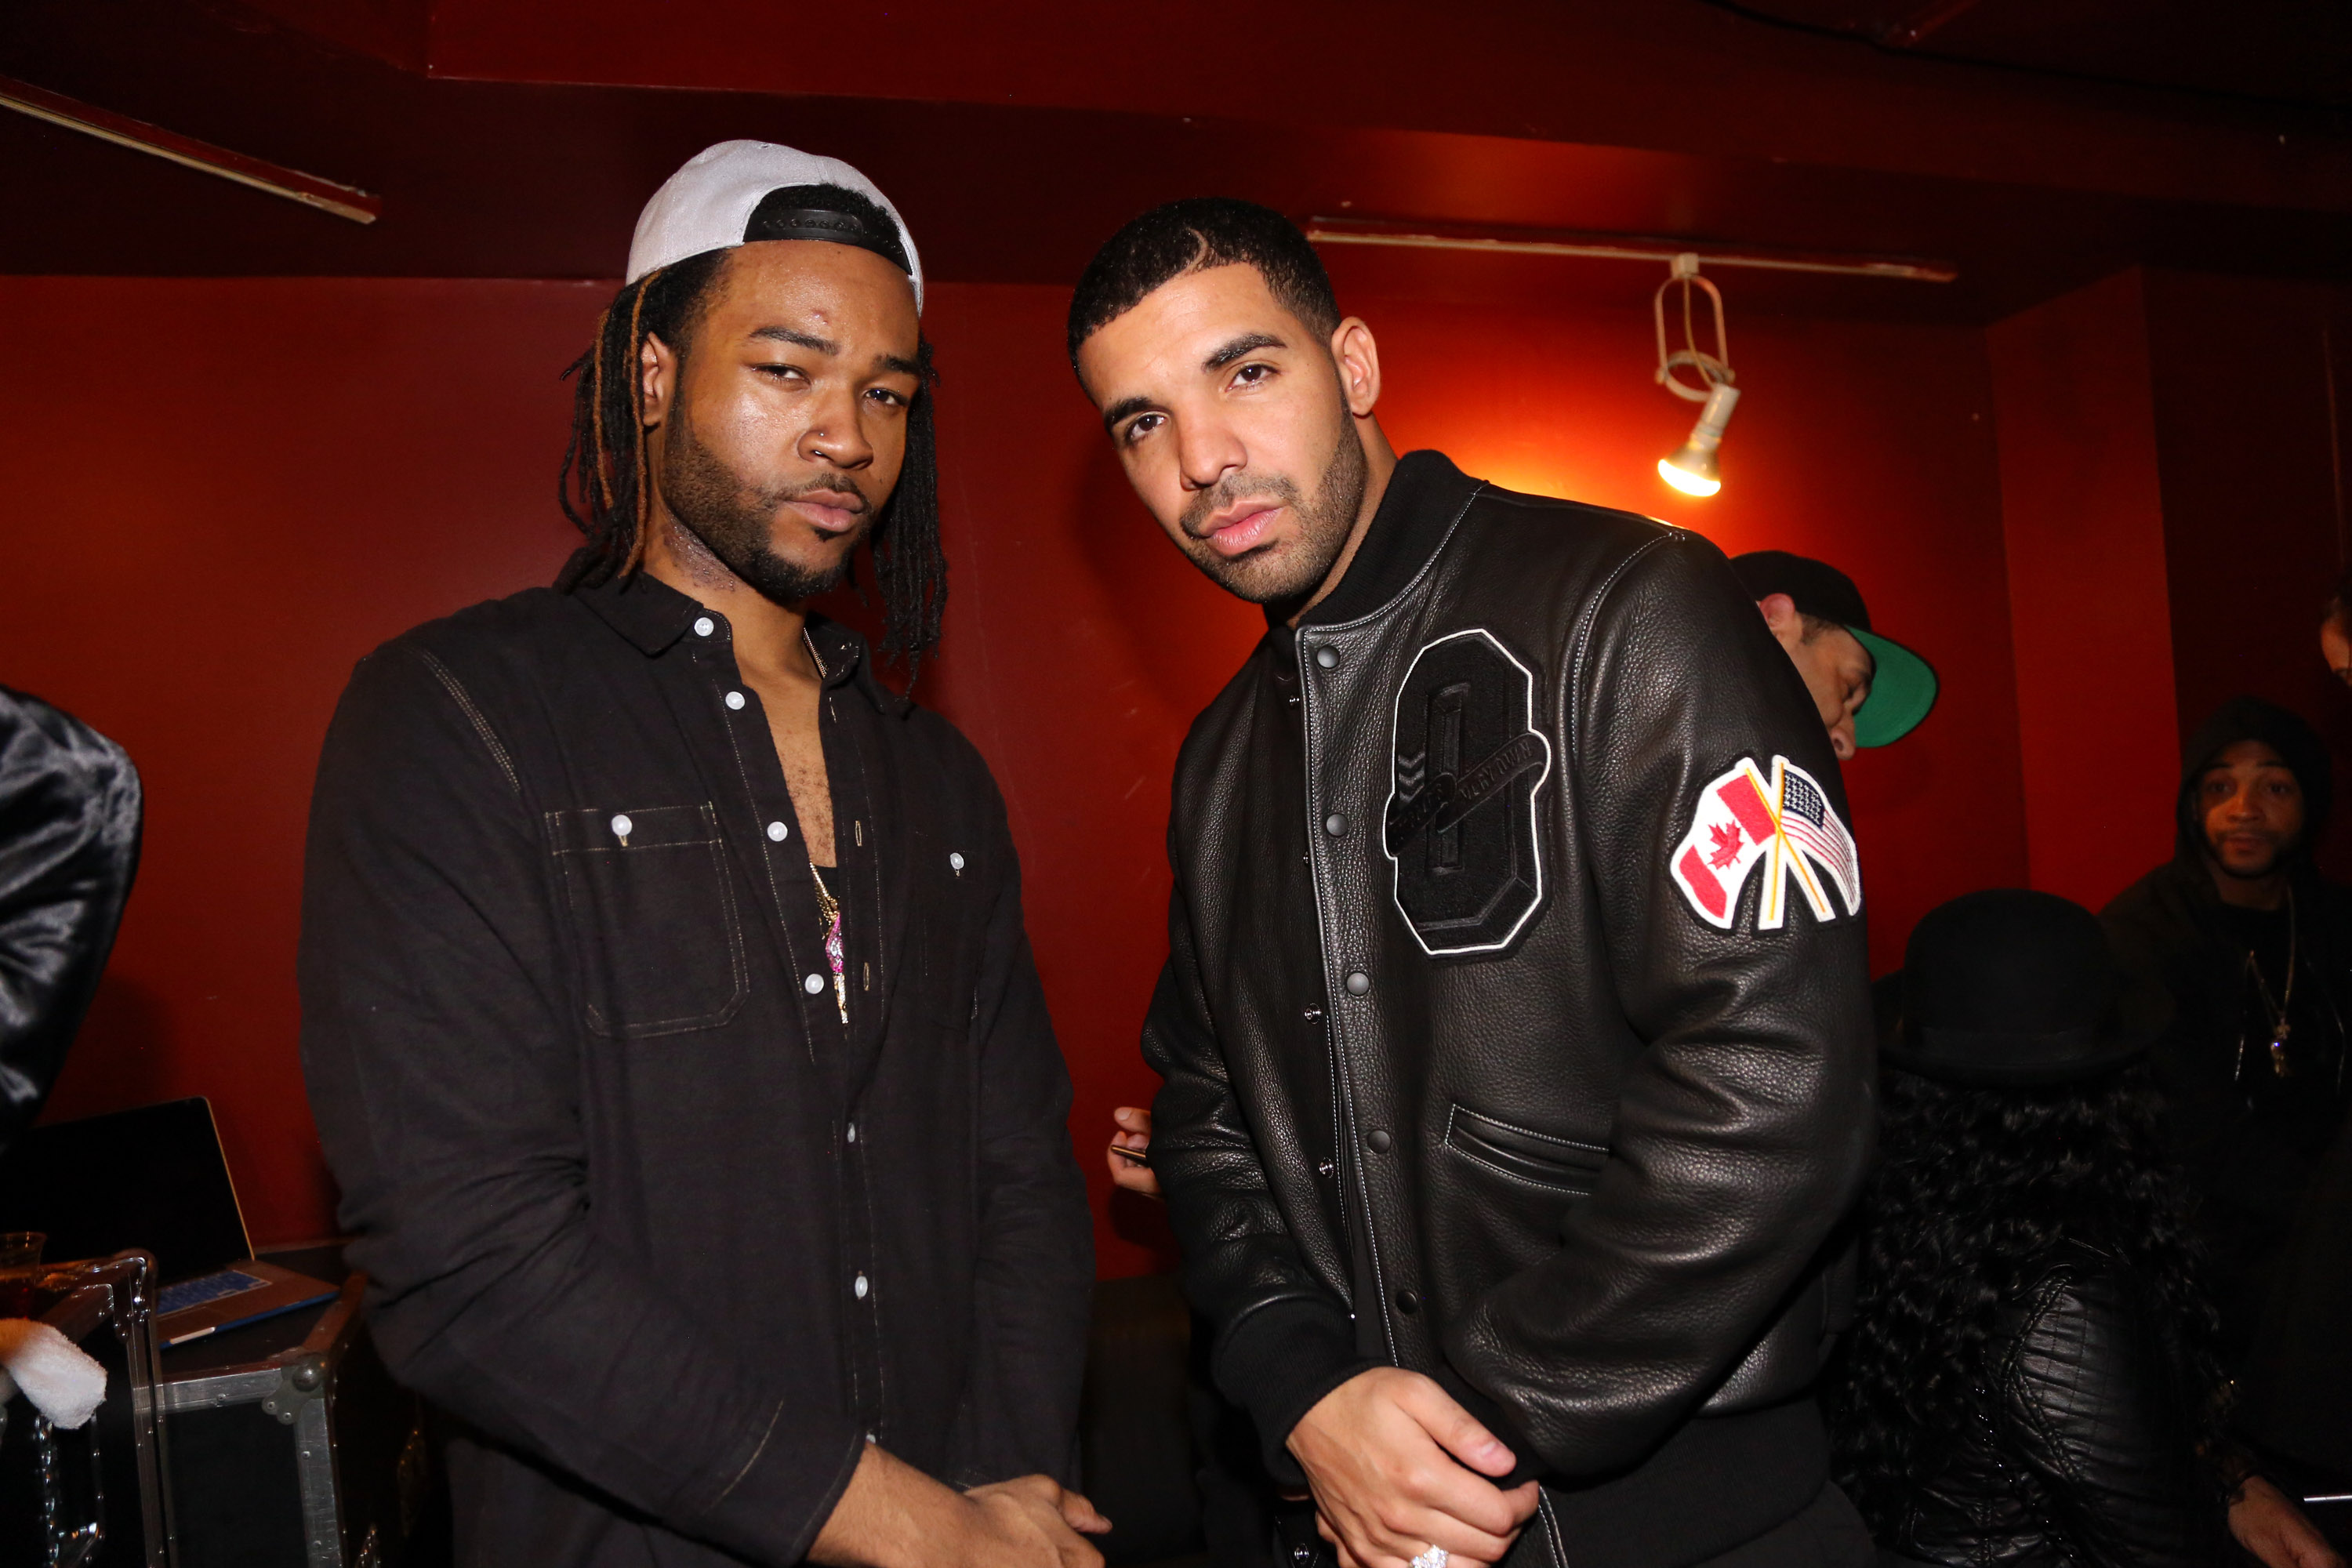 PARTYNEXTDOOR Returns With “The News” & Drake Assisted “Loyal” | Bossip